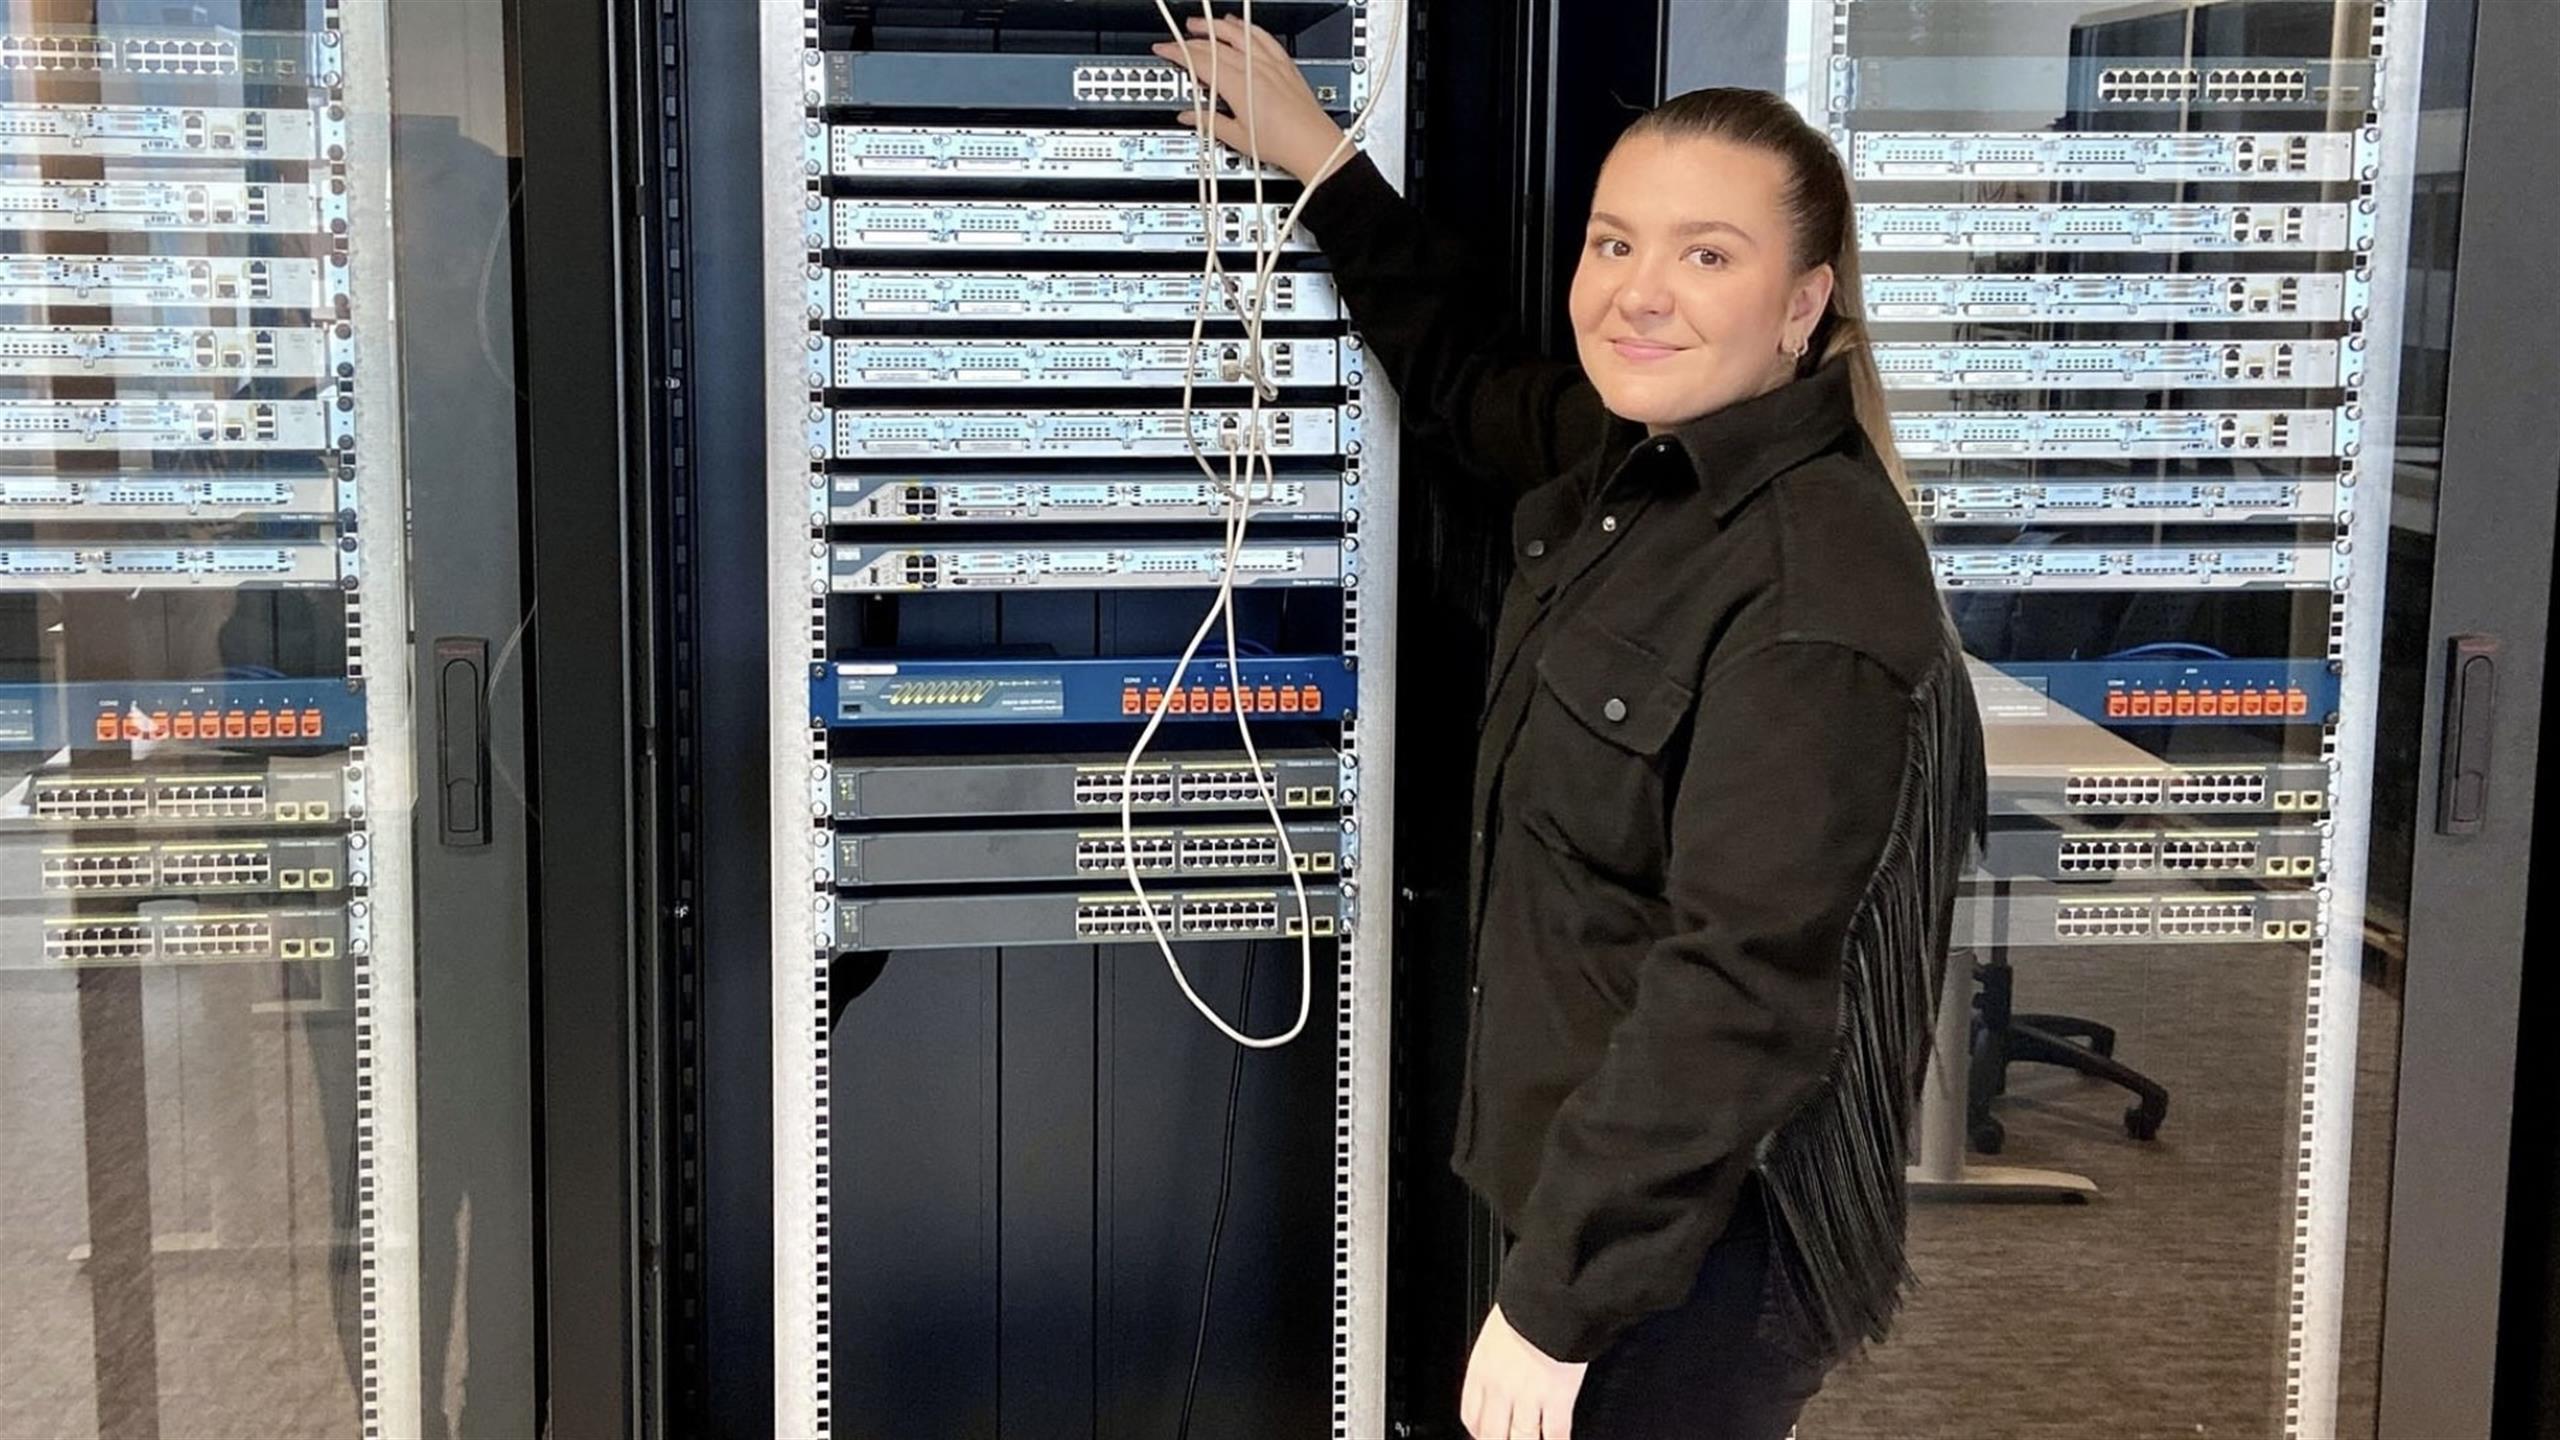 A smiling woman in front of a cabinet of servers.